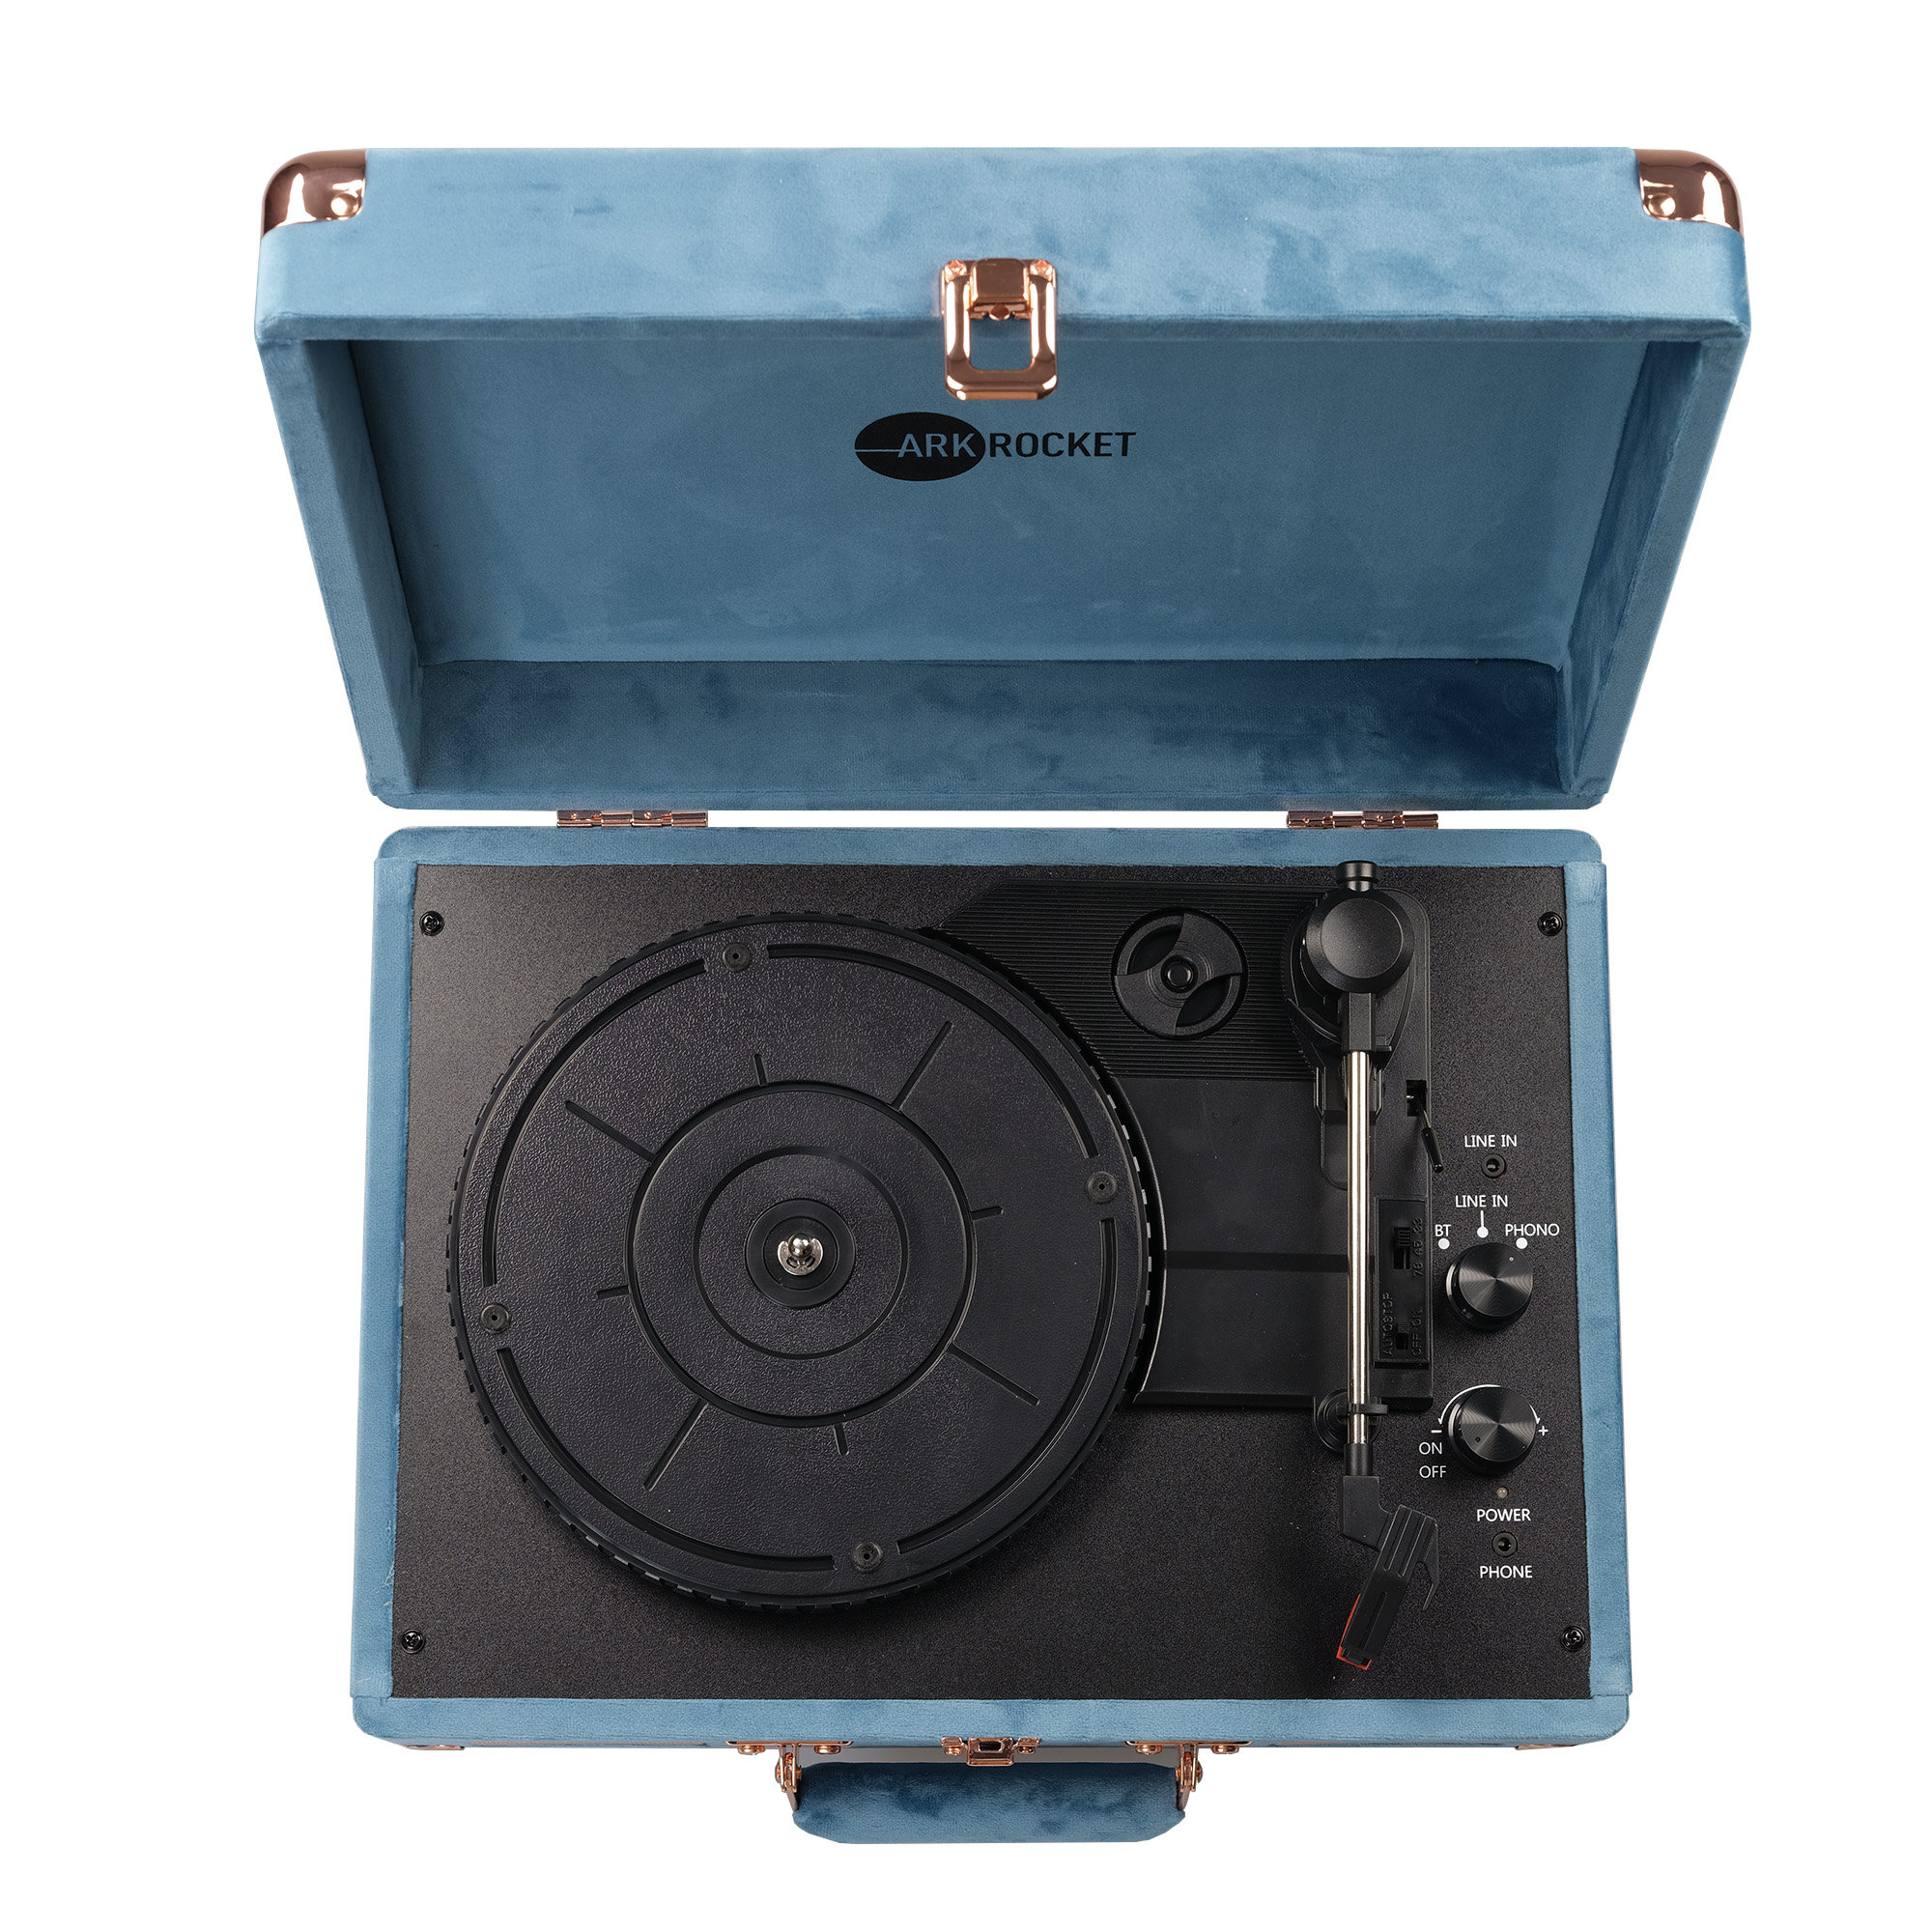 Victrola - Suitcase Turntable With Bluetooth (turquoise) (vinyl) : Target